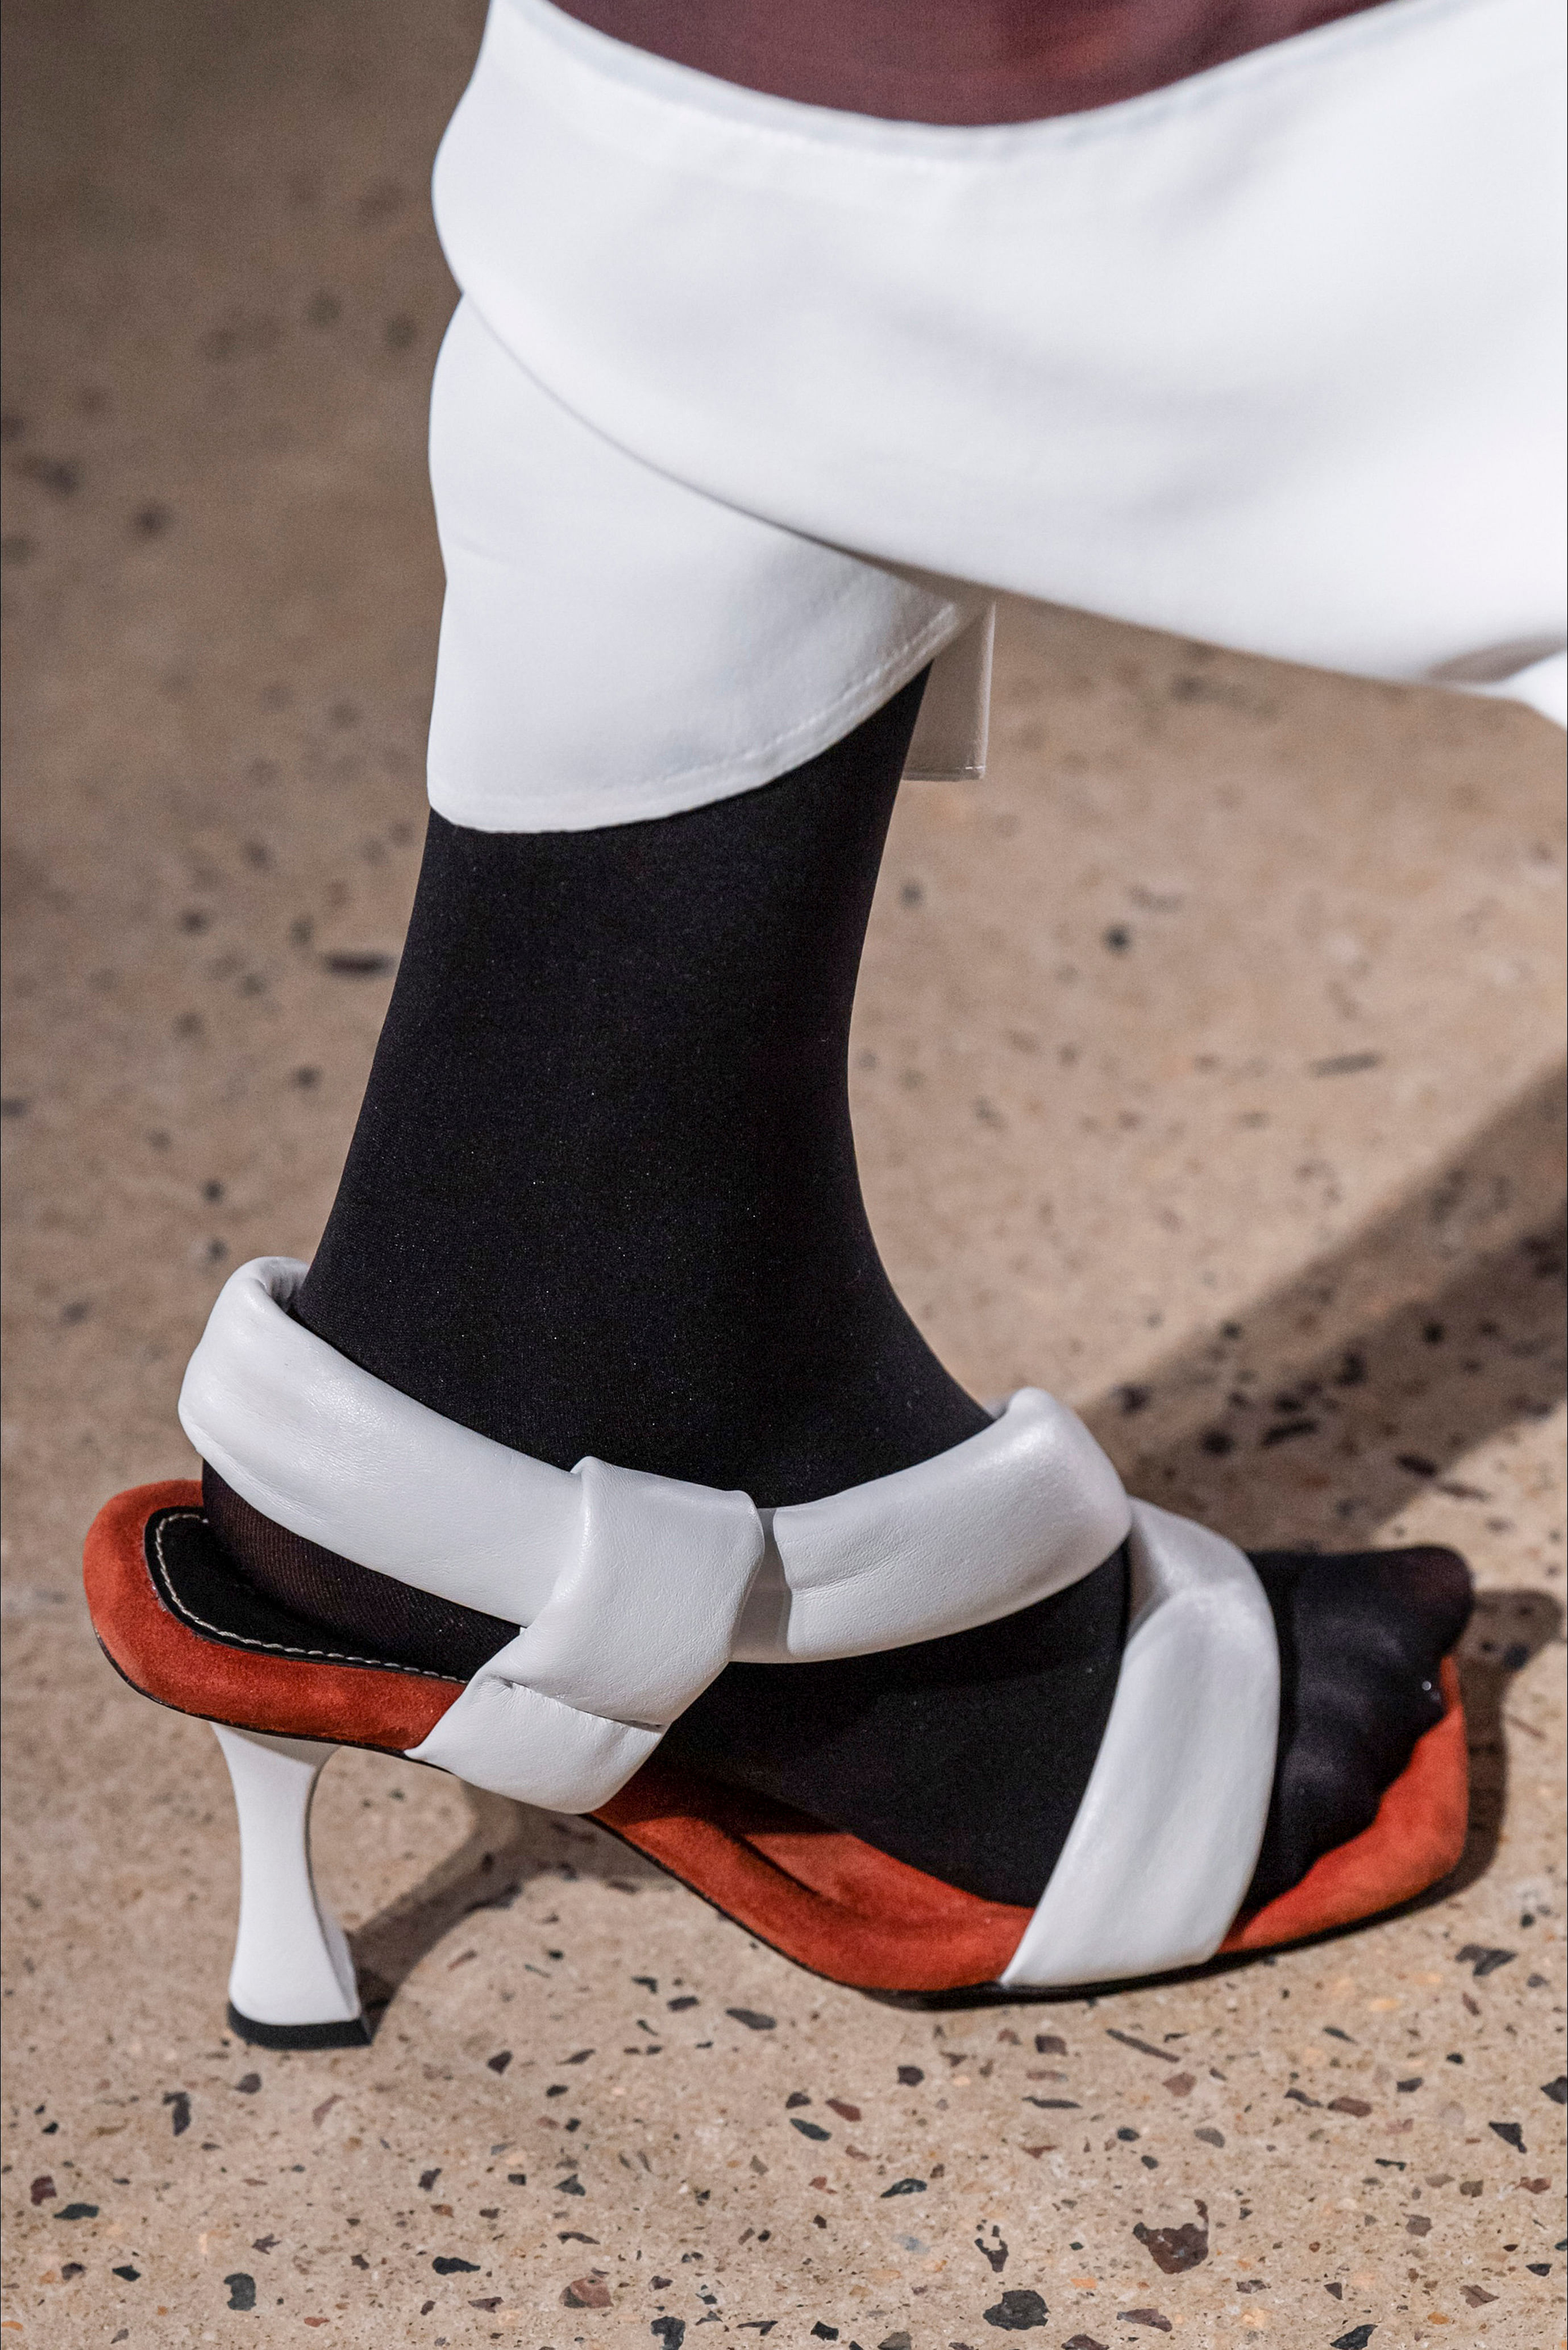 10 designer puffy strap sandals to get right NOW (cos' they're comfy